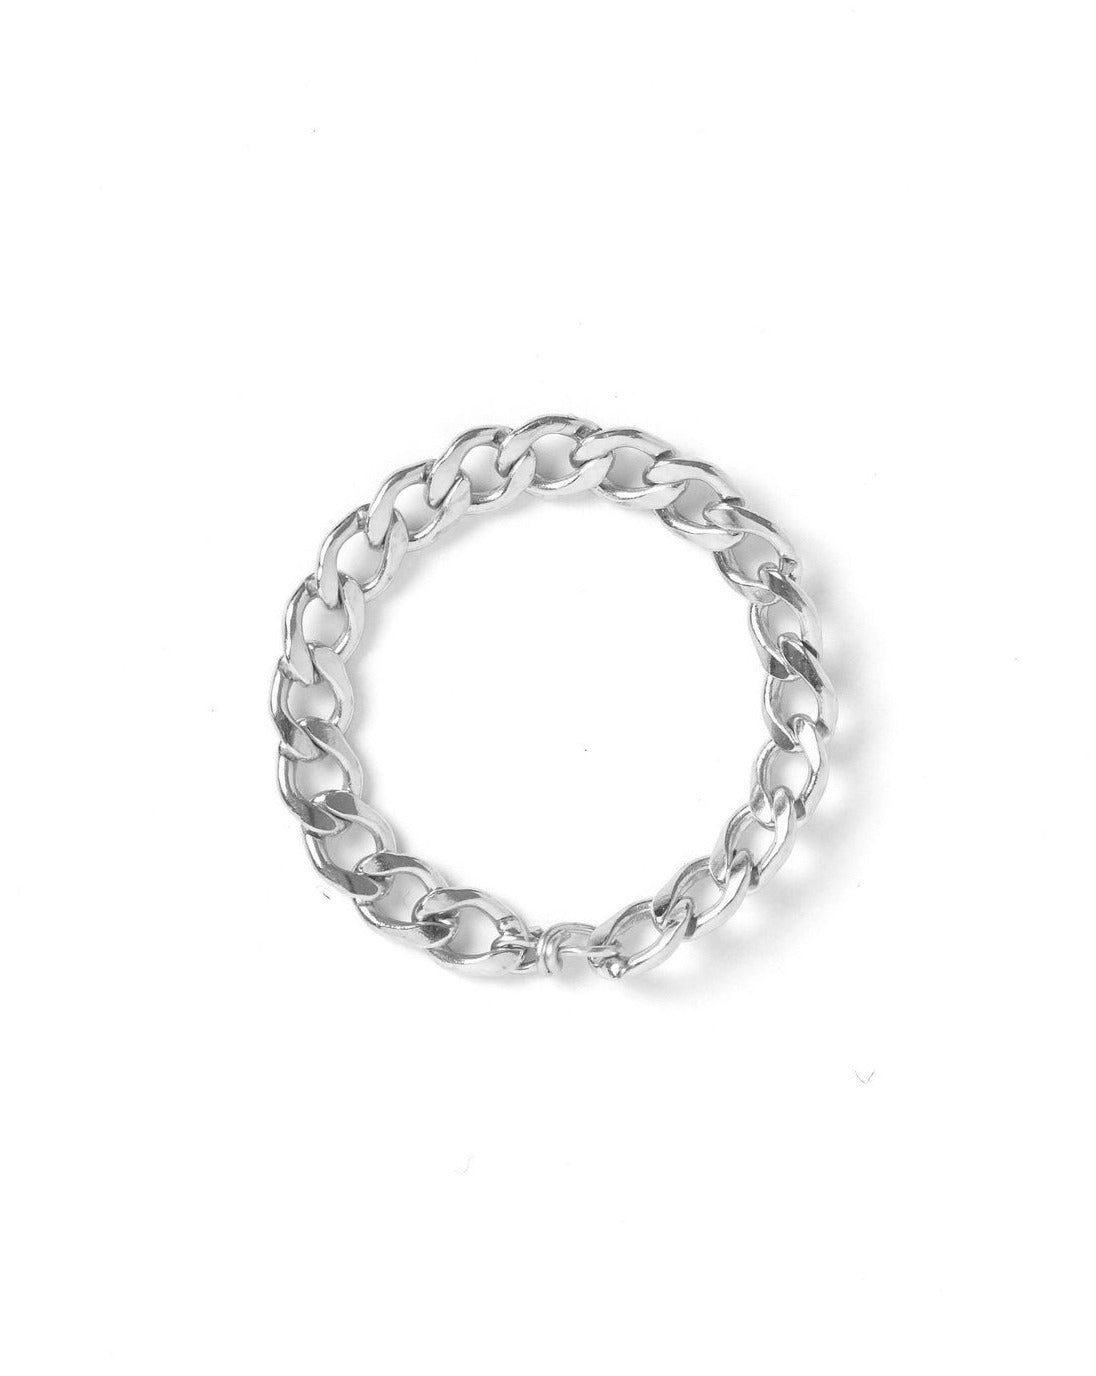 Braided Chain Ring by KOZAKH. A flat Cuban link chain ring crafted in Sterling Silver.